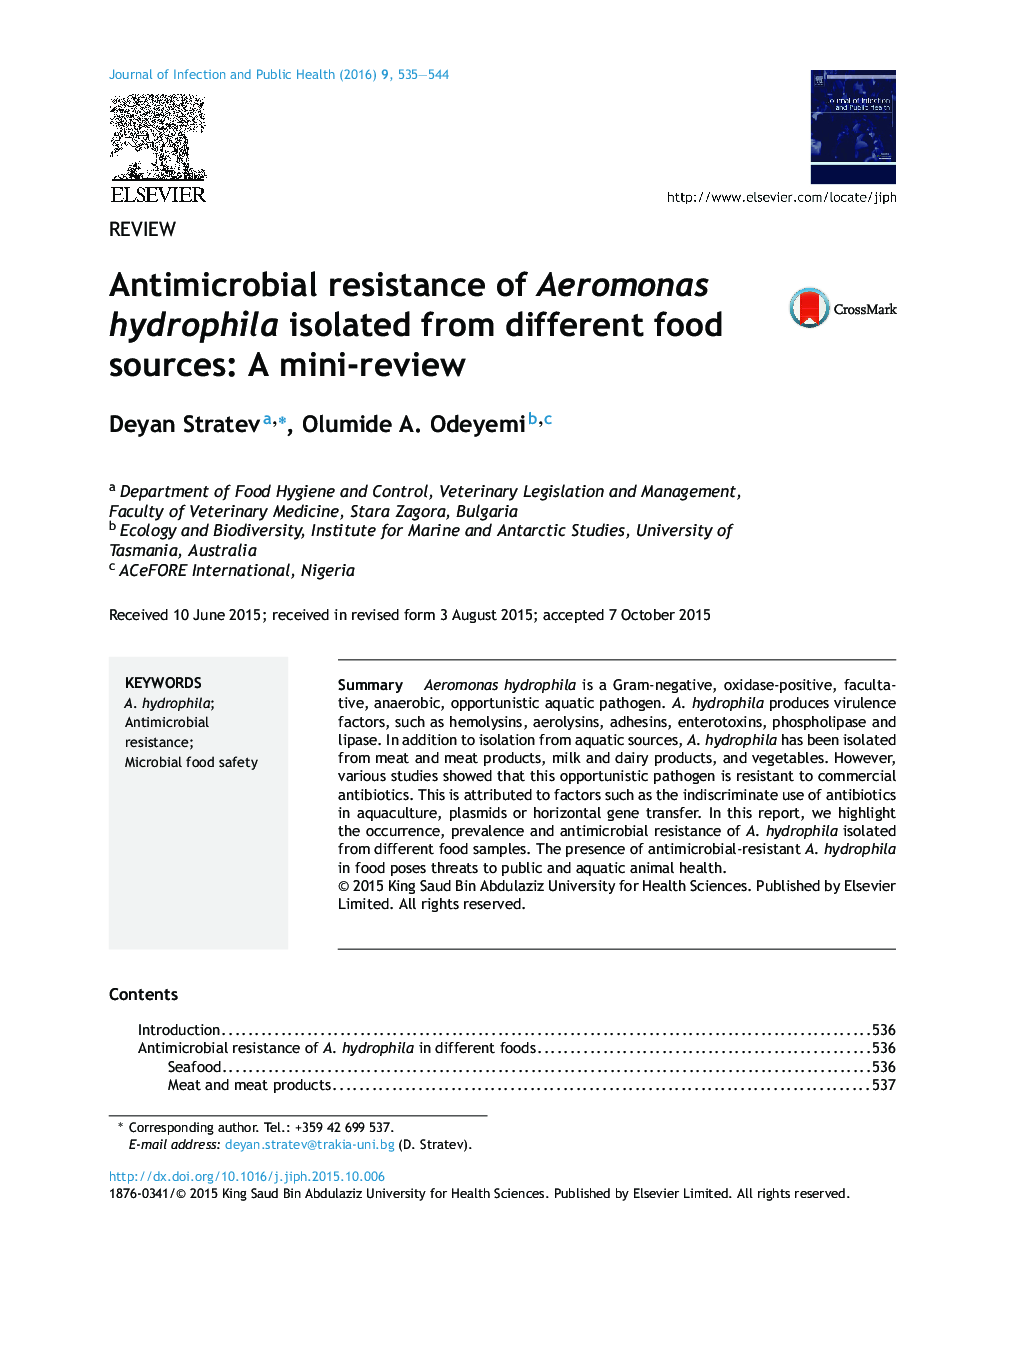 Antimicrobial resistance of Aeromonas hydrophila isolated from different food sources: A mini-review